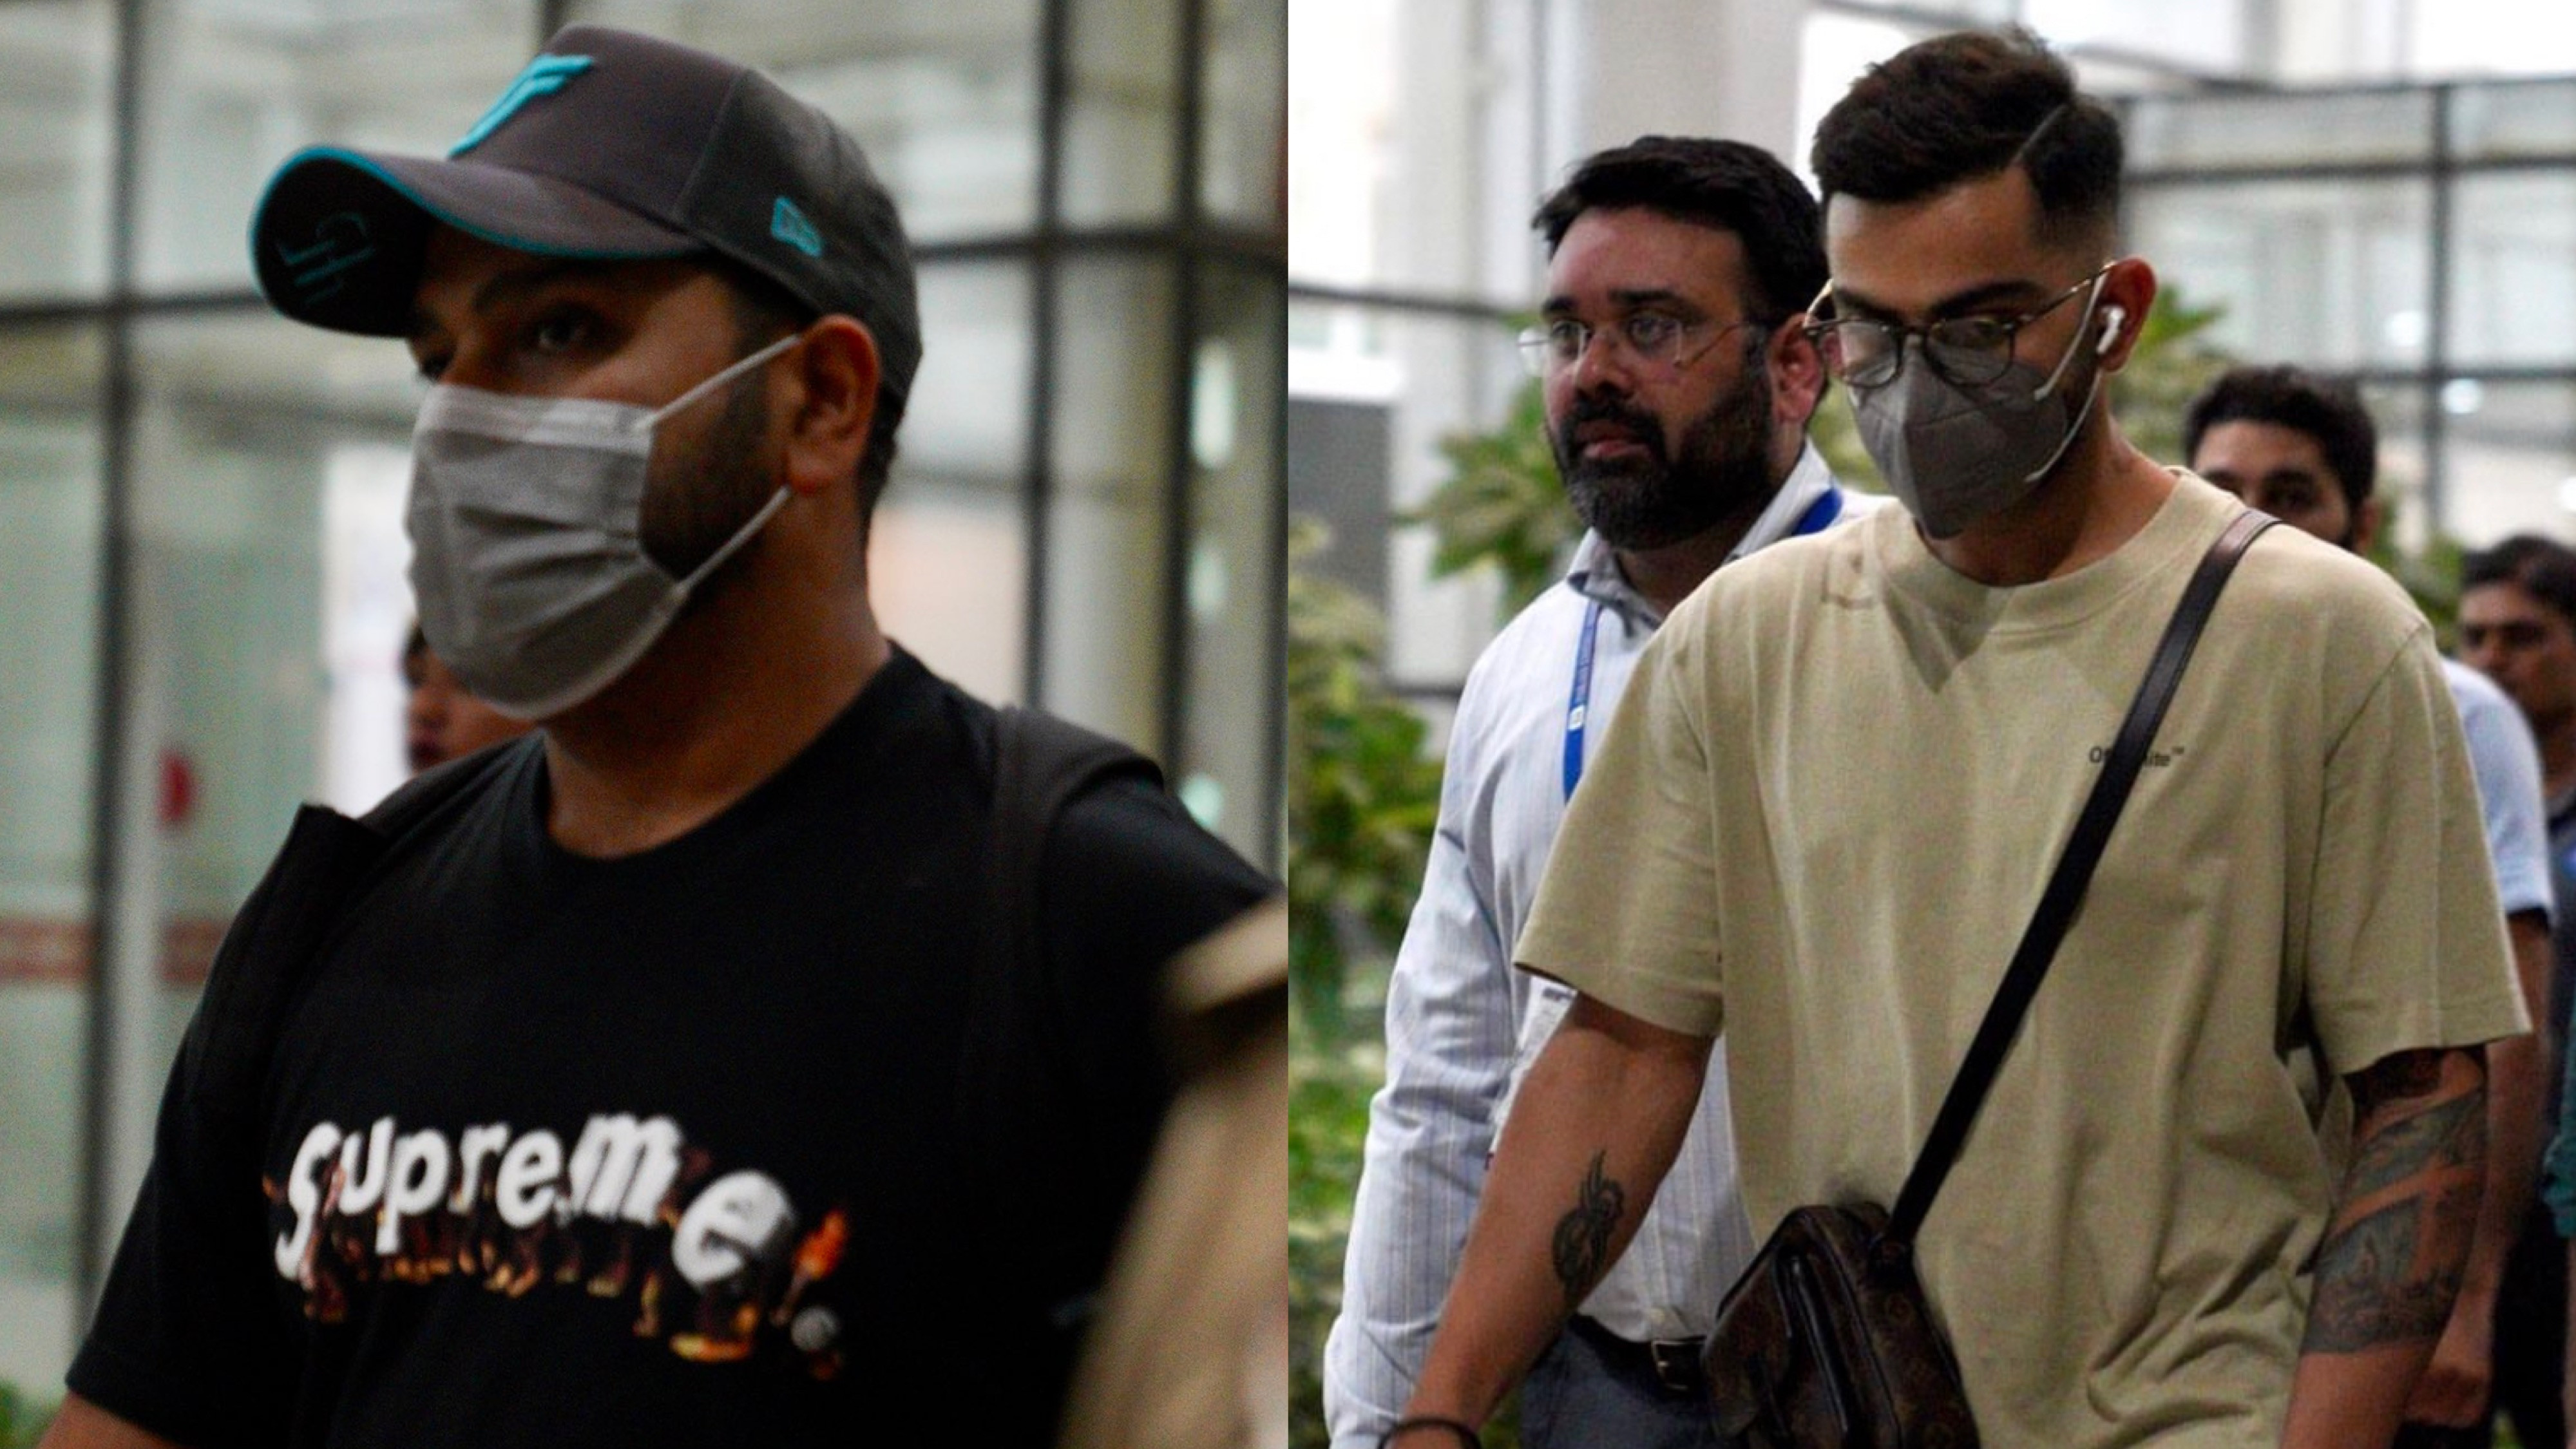 IND v AUS 2022: PICS – Team India arrive in Chandigarh ahead of T20I series with Australia